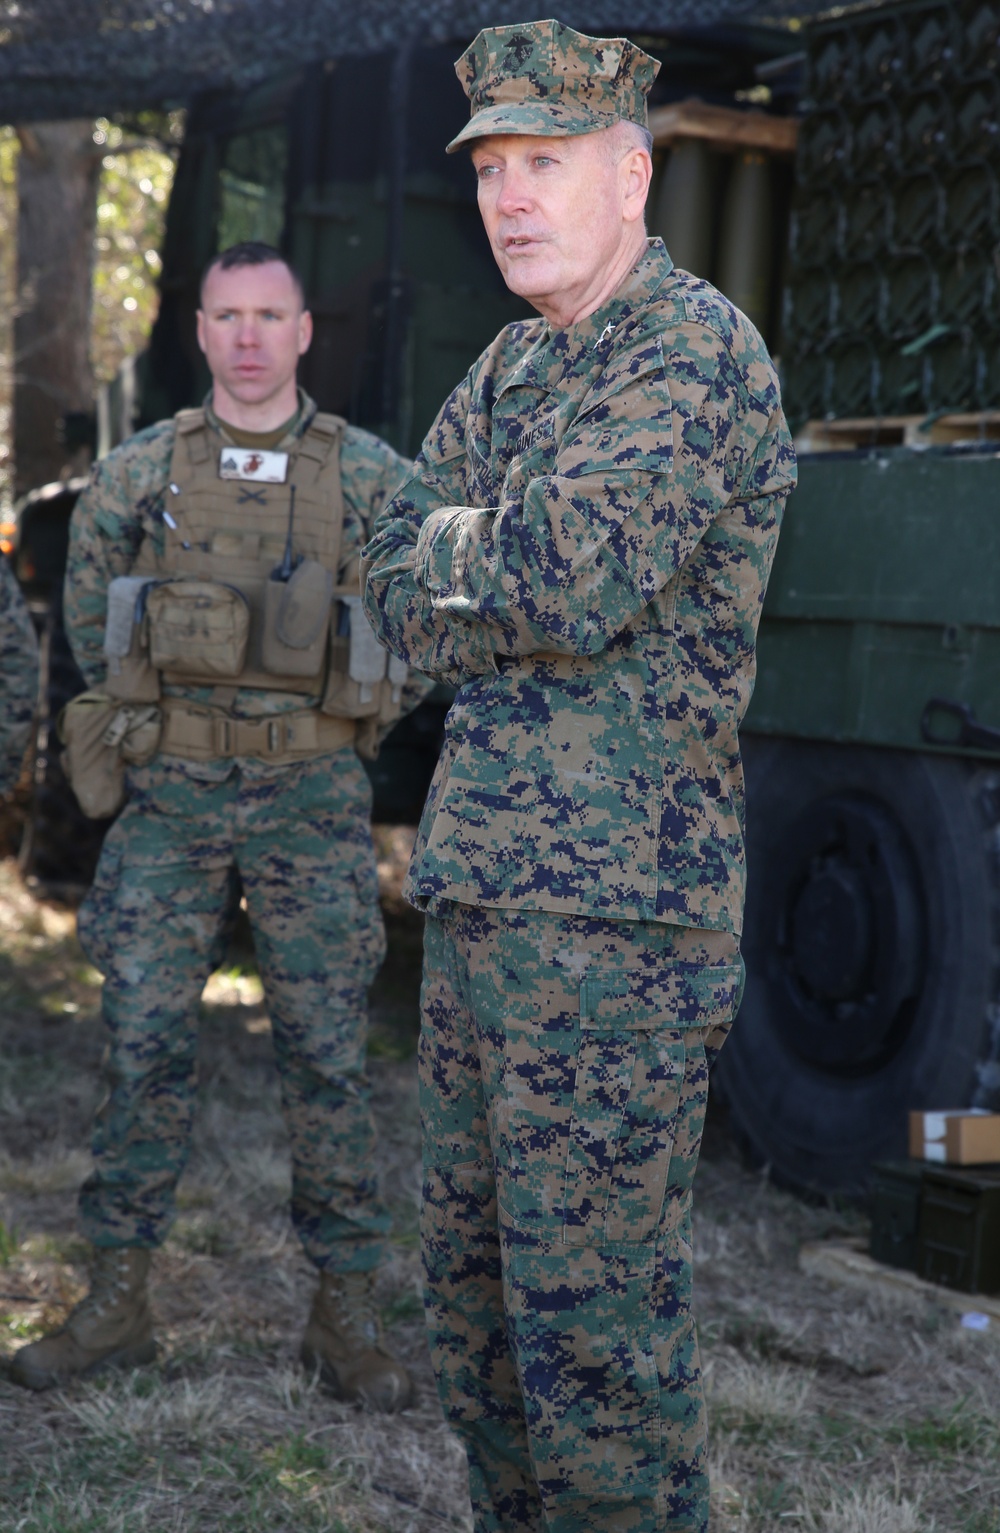 Commandant of the Marine Corps visits Integrated Task Force Marines